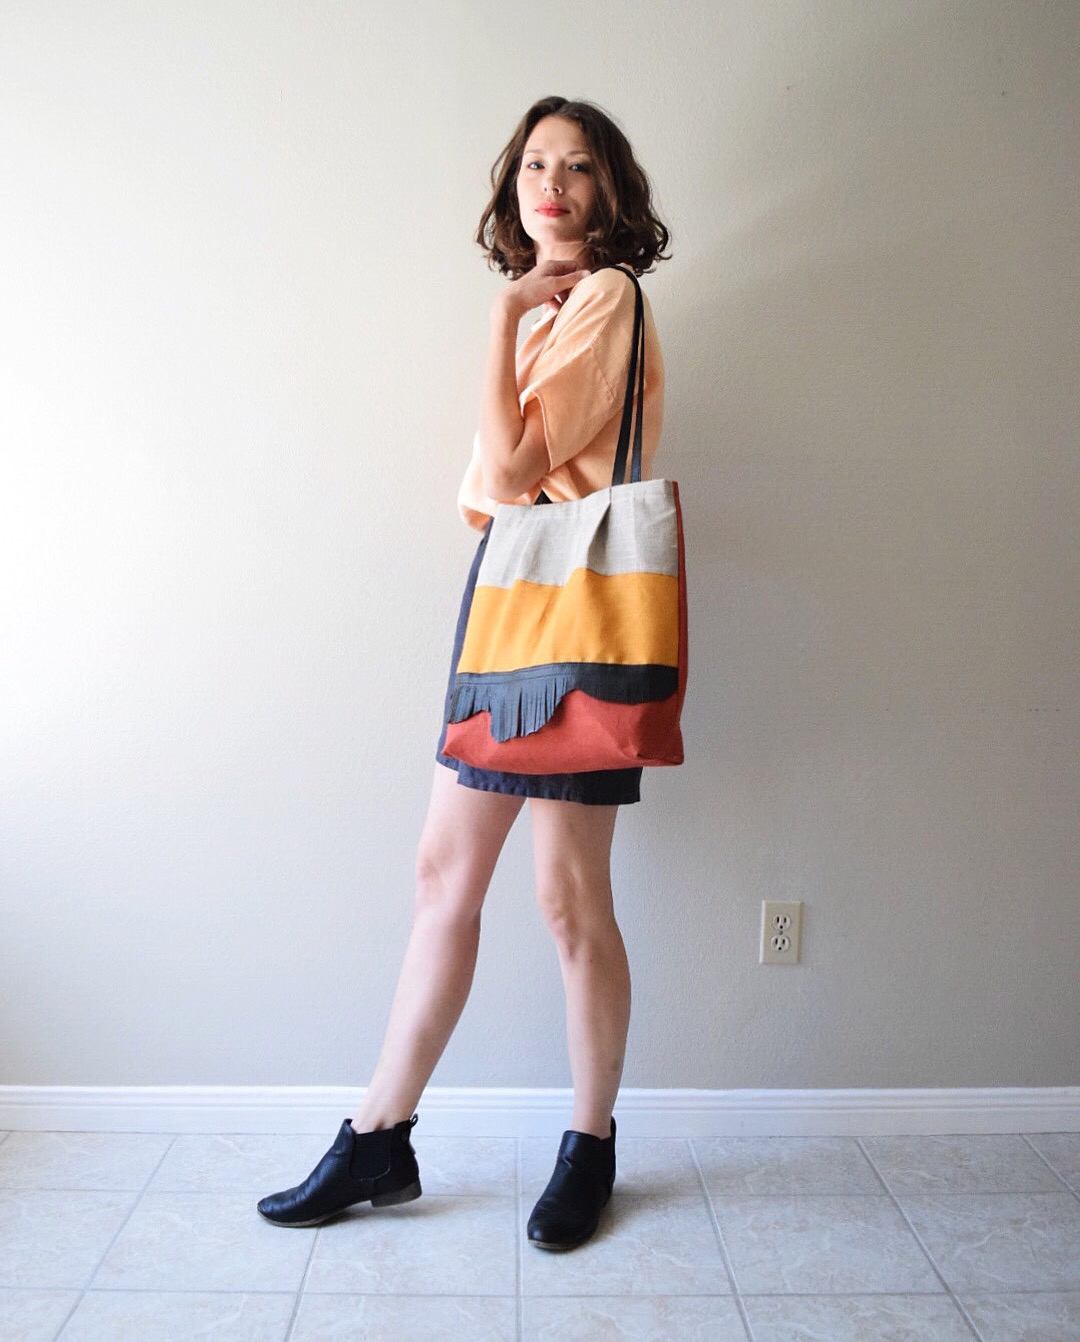 Randee, Top, shorts + tote made with Fabrics-Store linen. Nine Iron, Apricot Ice, Sedona, Autumn Gold, and M...